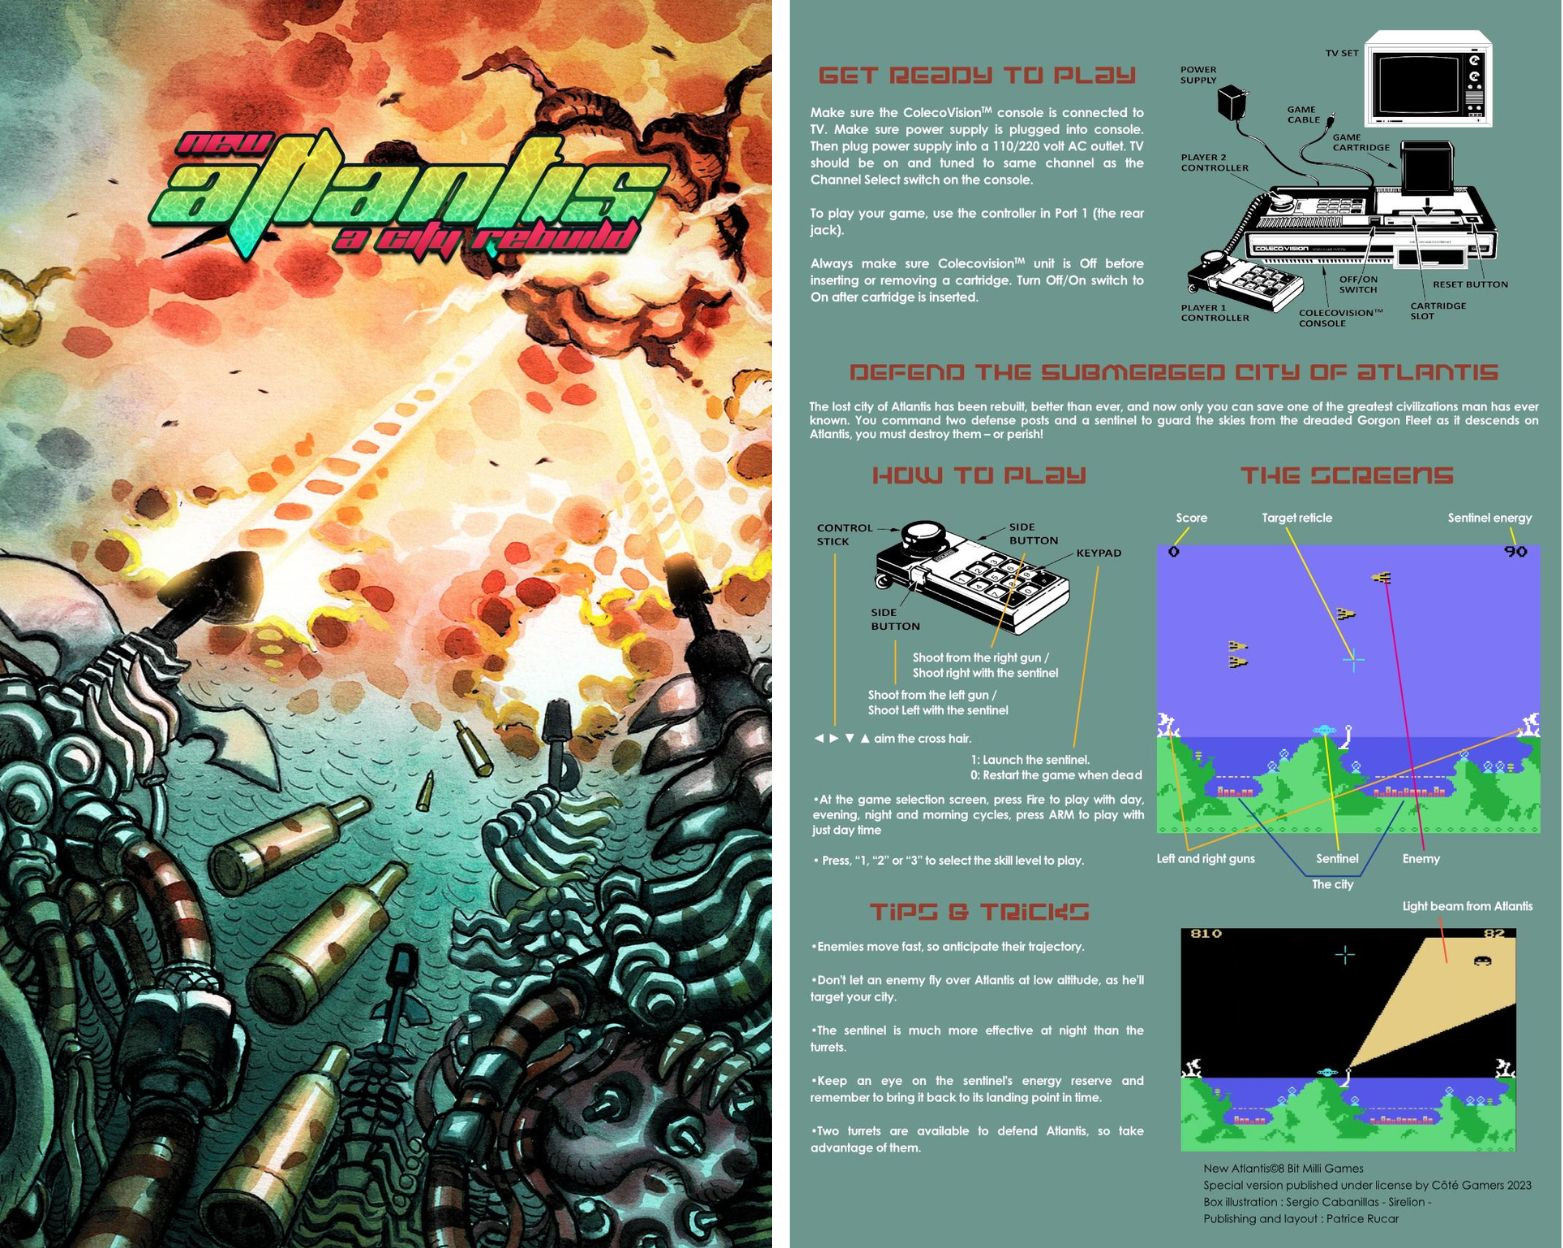 Nex Atlantis ColecoVision poster and instructions manual